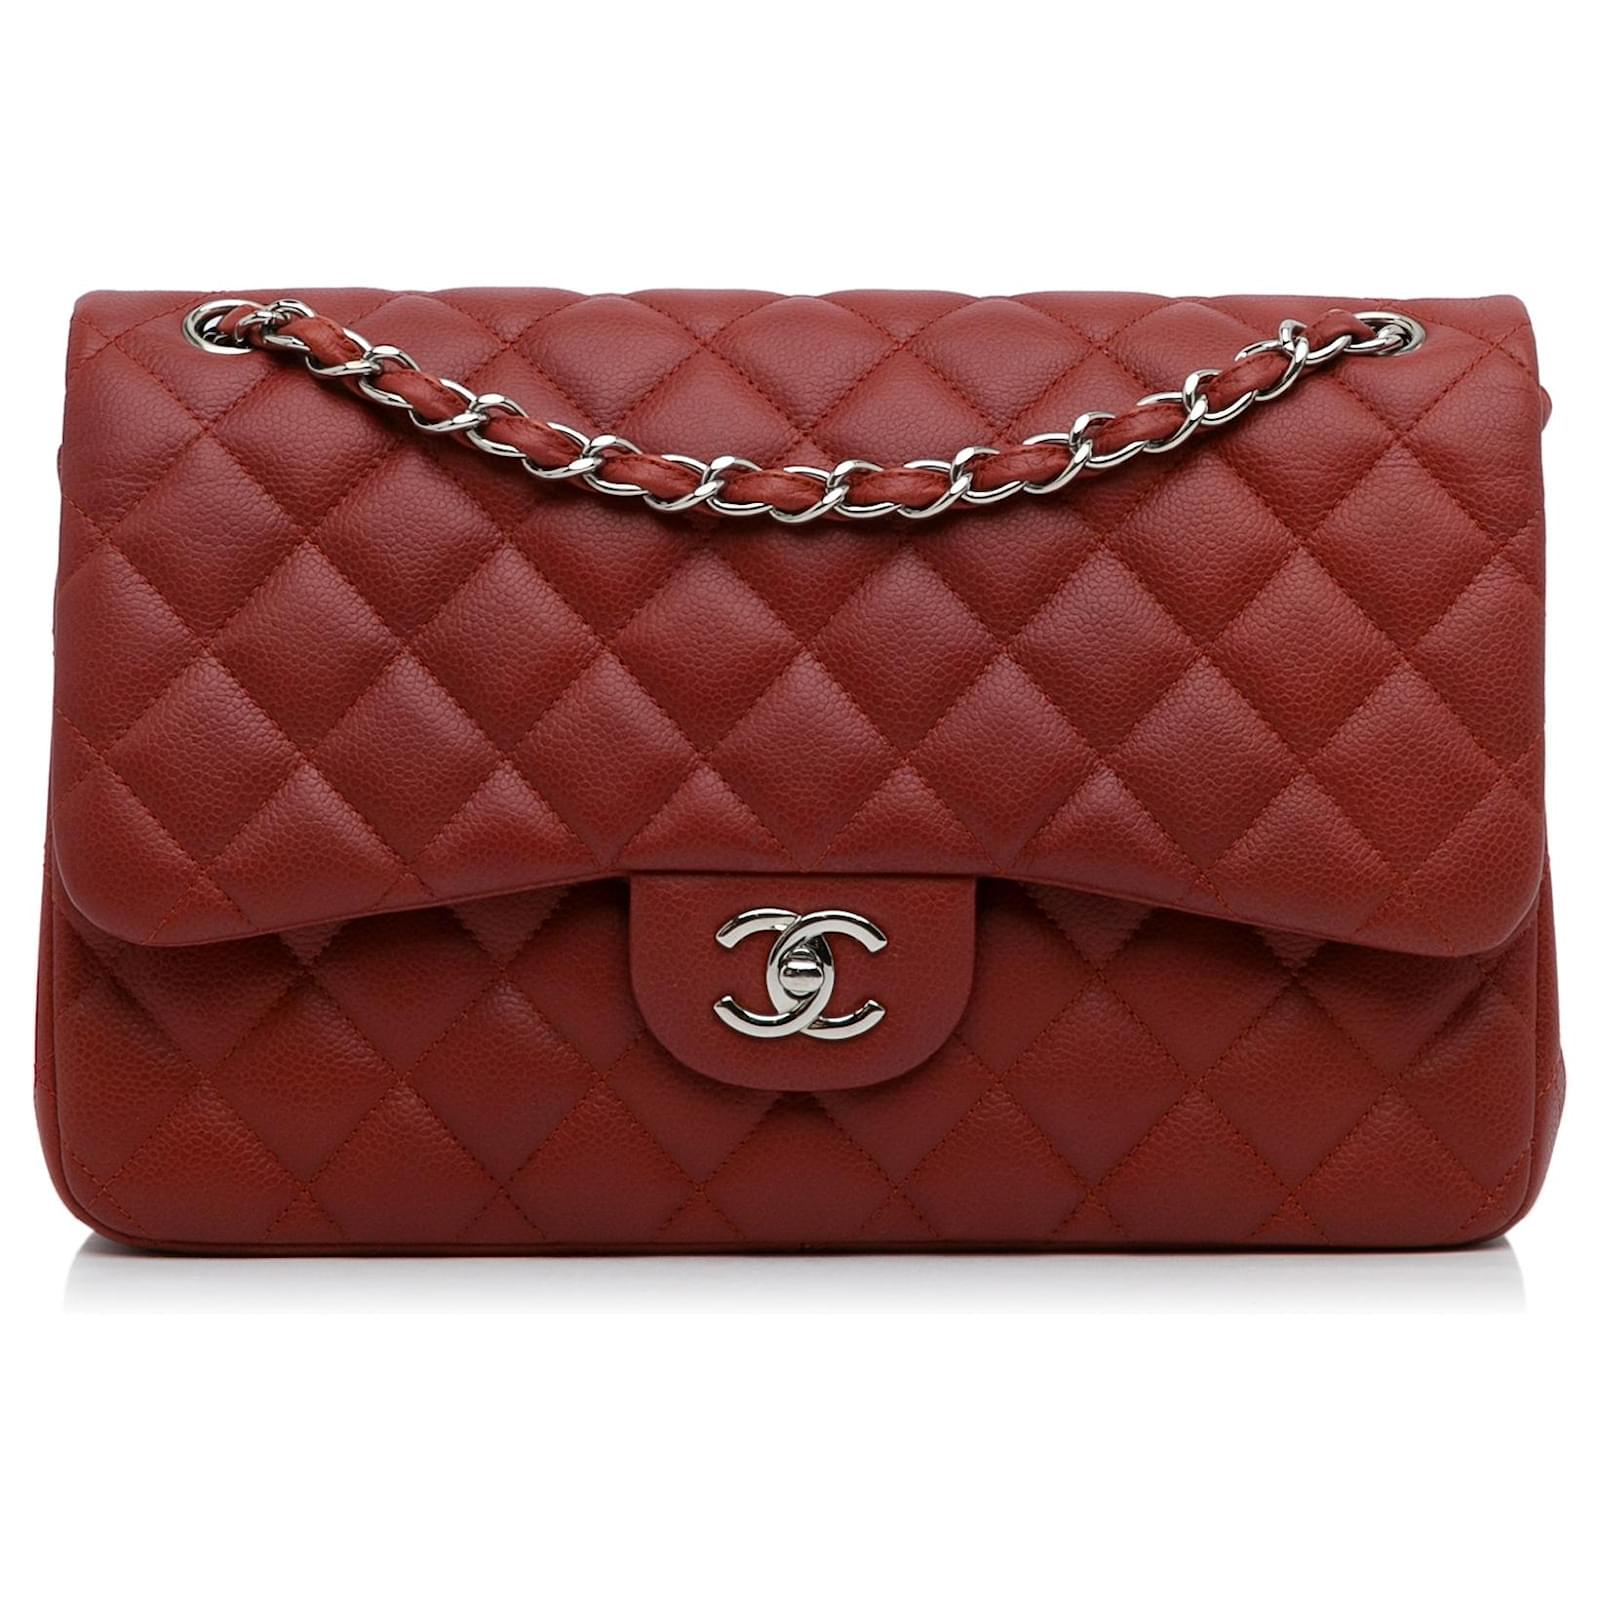 Chanel Limited edition Coco Sailor Classic lined Flap Bag